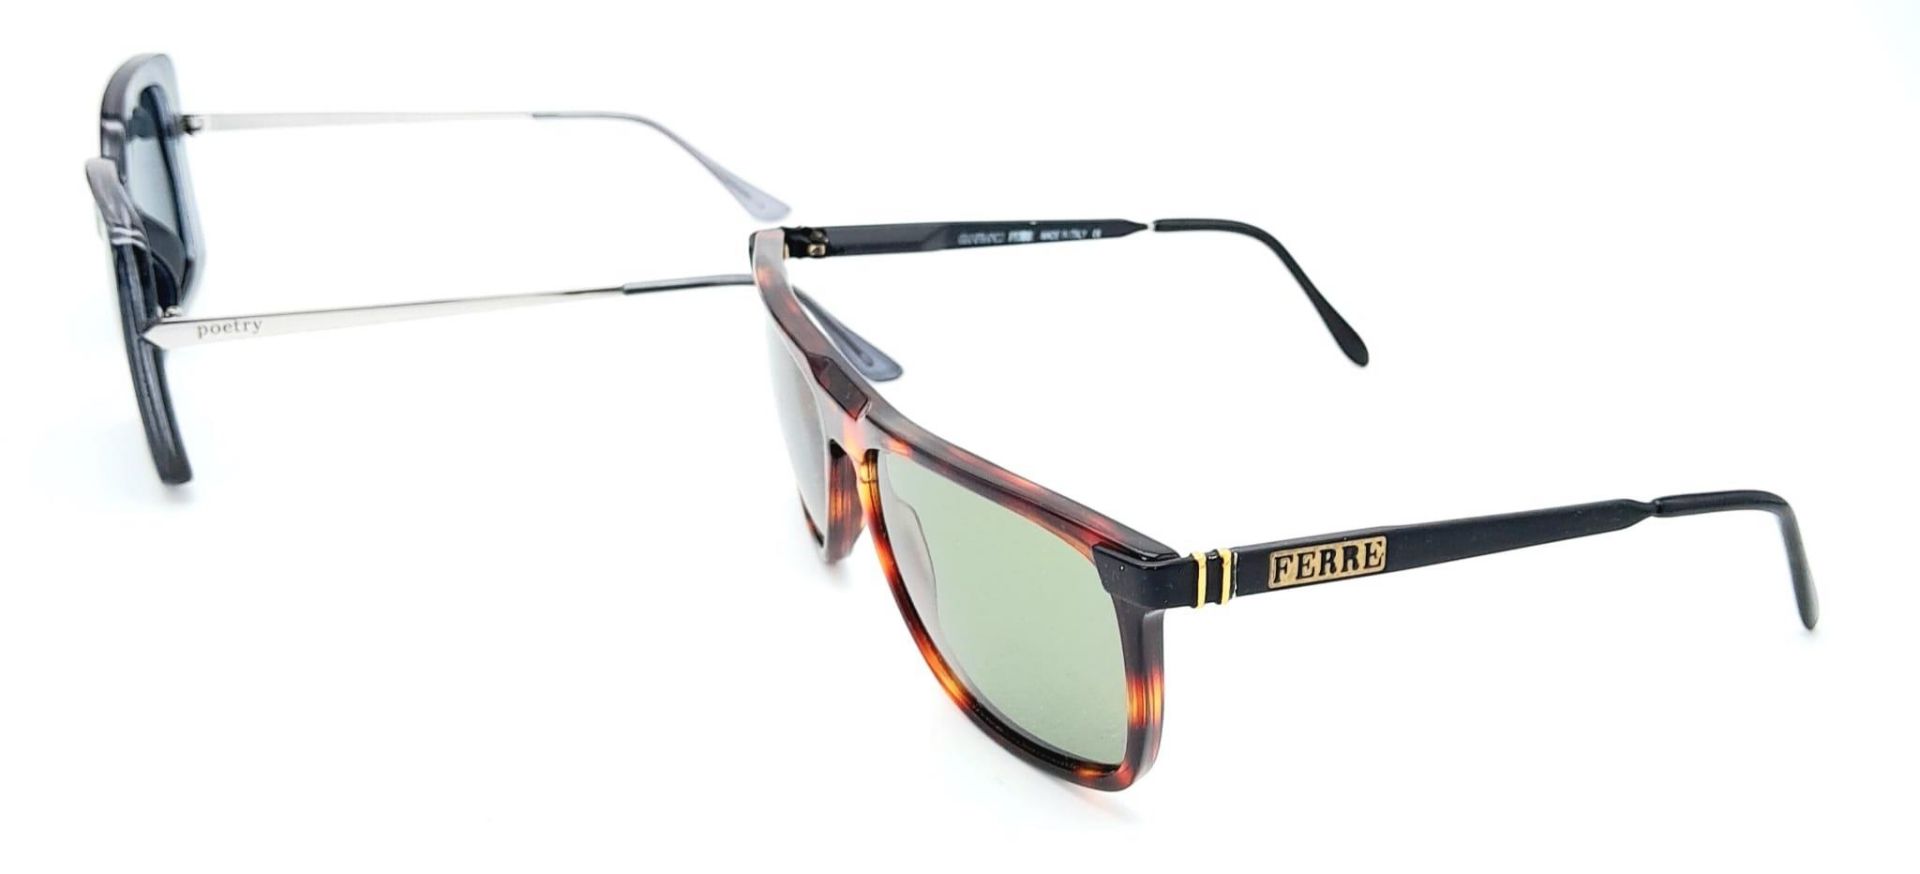 Two Pairs of Designer Sunglasses - Poetry and Ferre. - Image 3 of 6